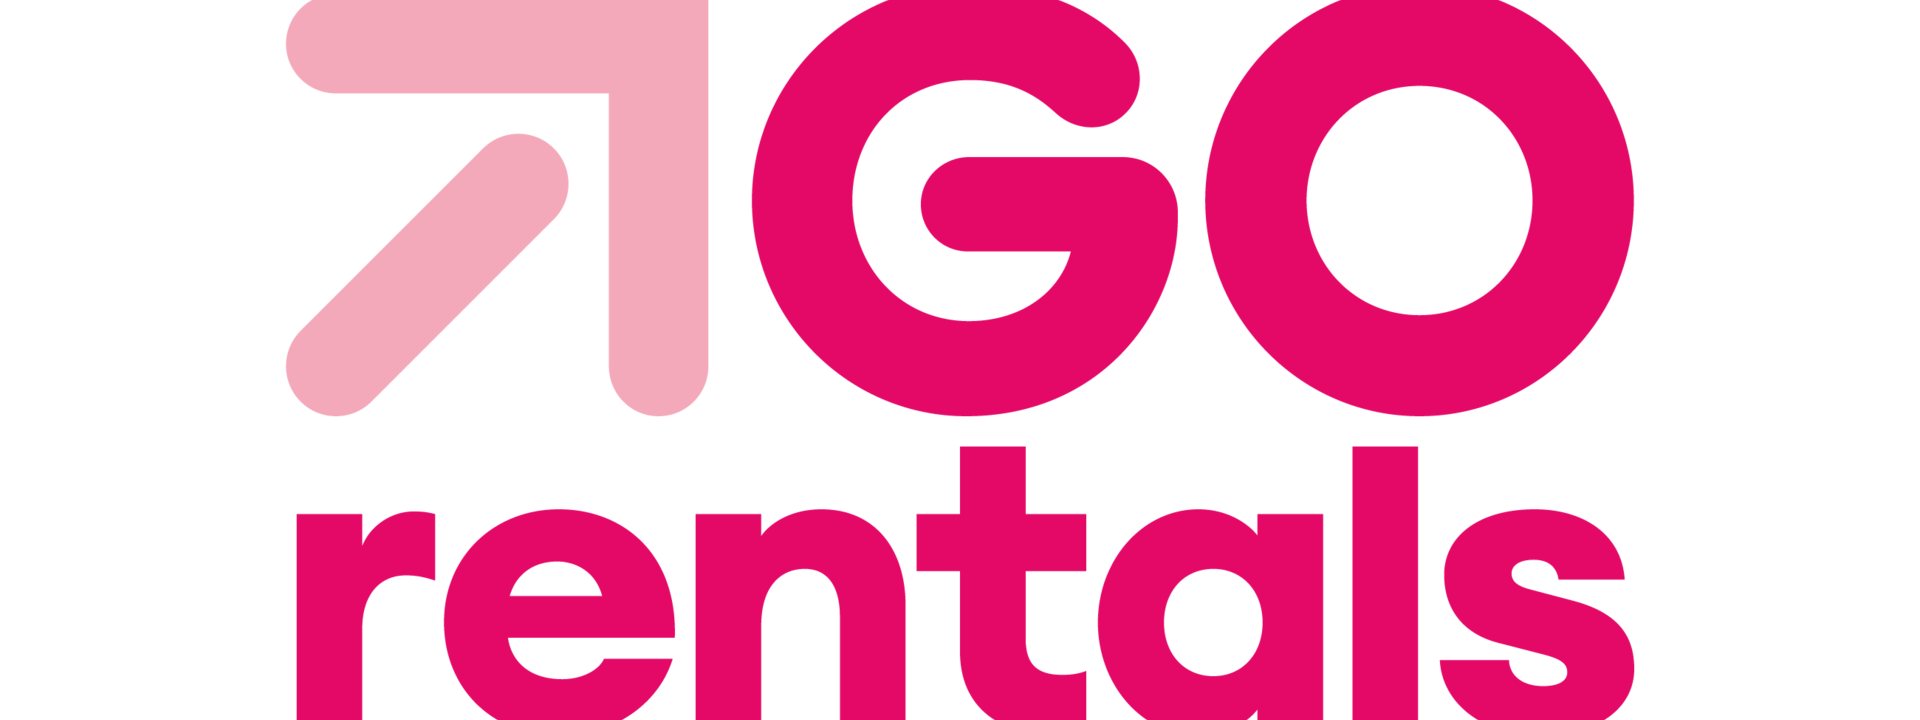 GORE1005_GORentals_Logo_Pink_AW_STACK SMALL_5.png